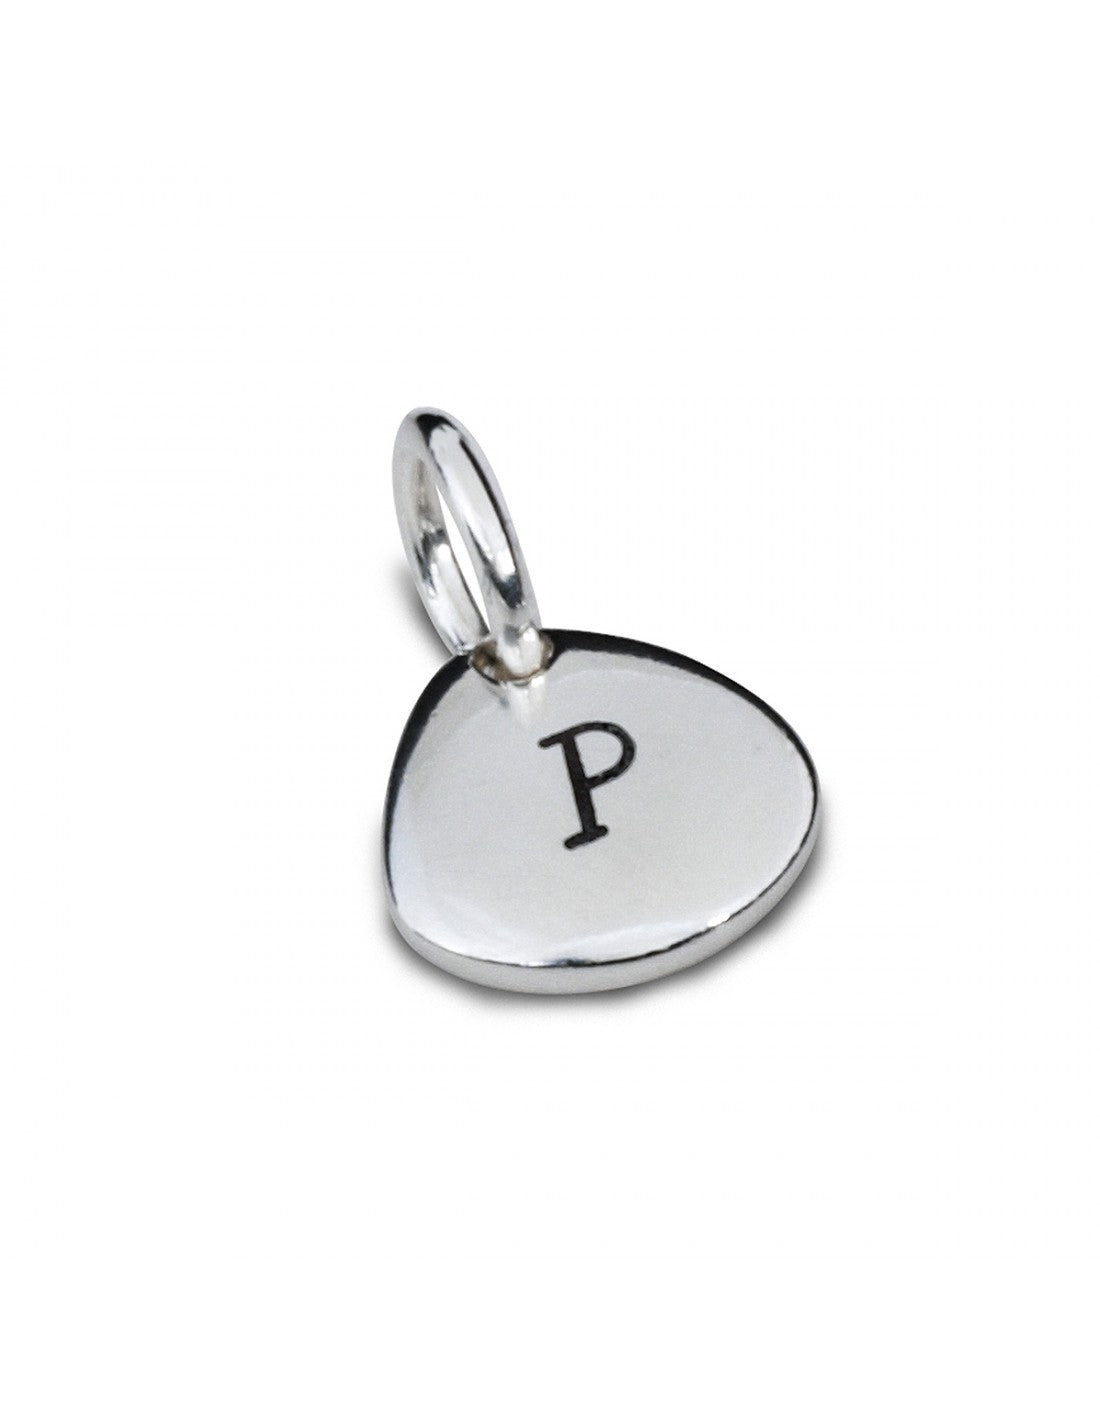 Pet Paw Print Personalised Silver Charm Engraved Initial